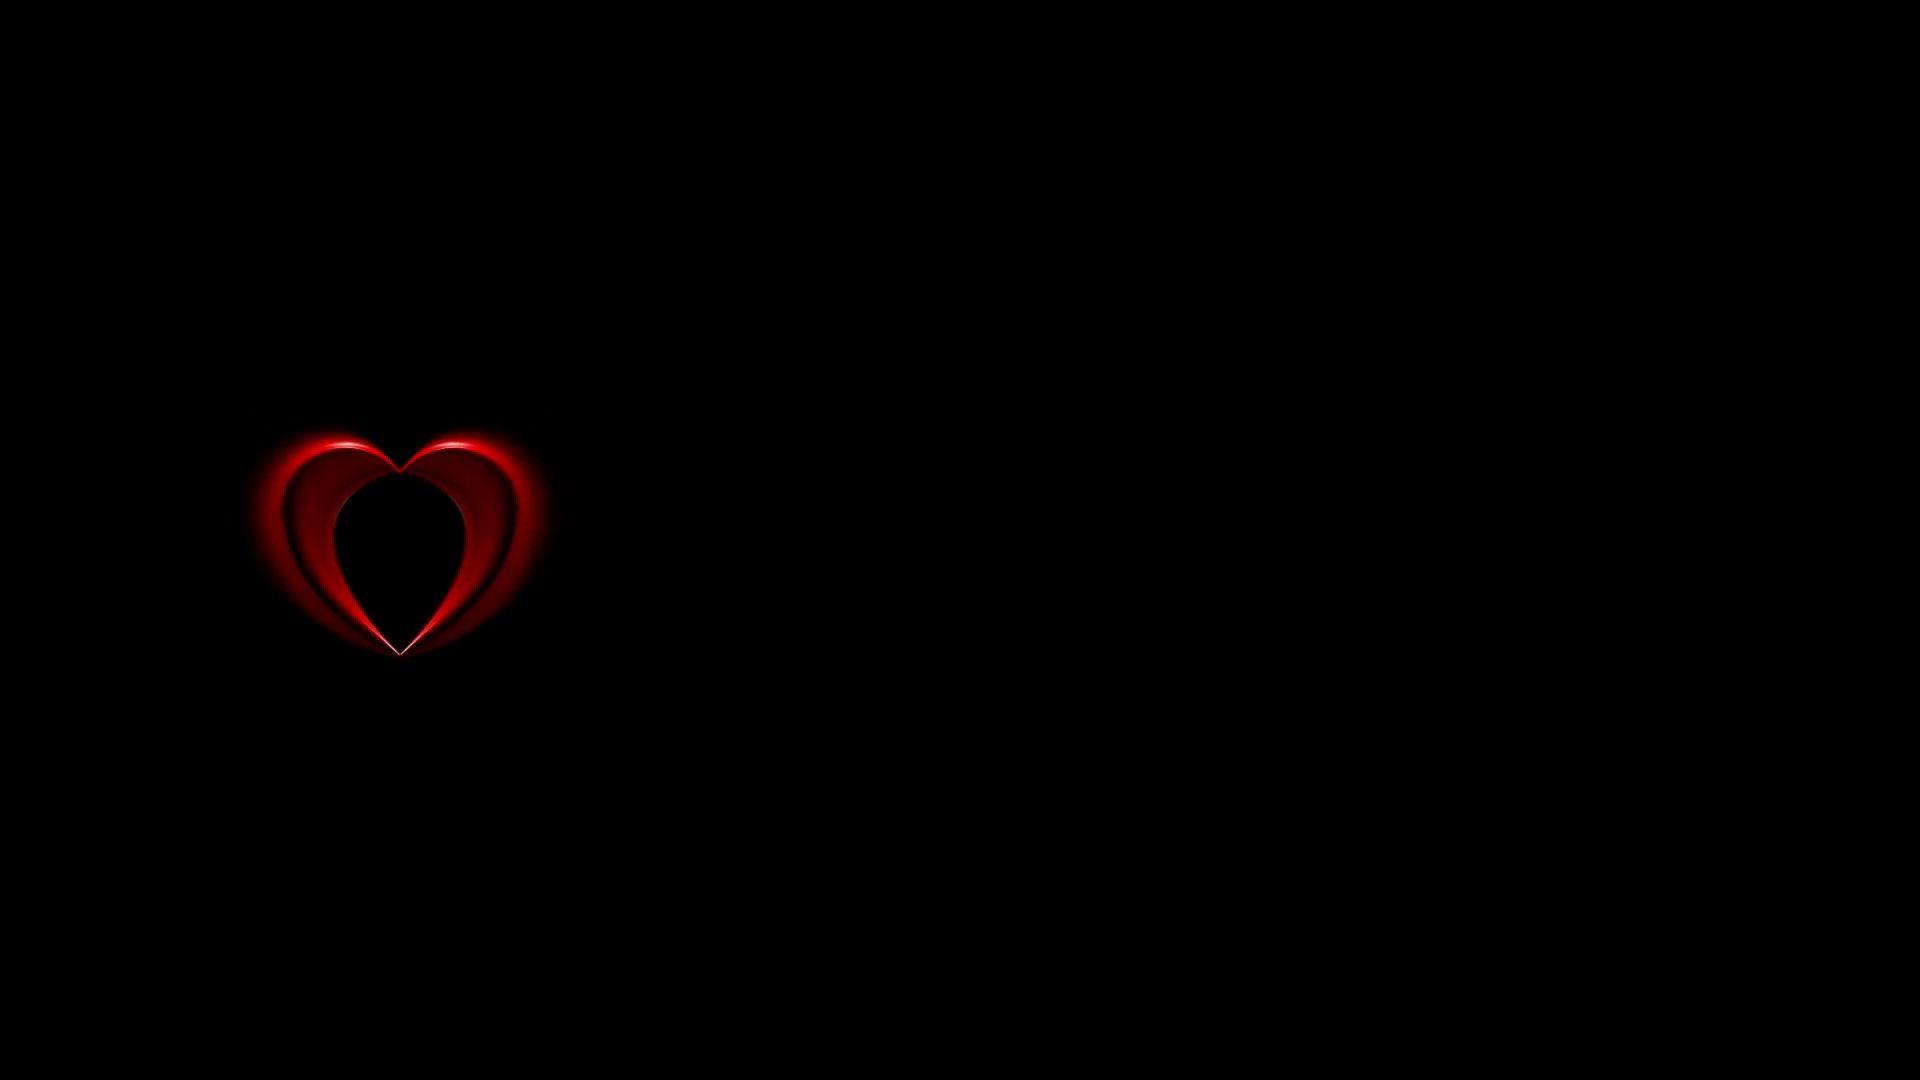 Black And Red Heart Wallpapers  Wallpaper Cave